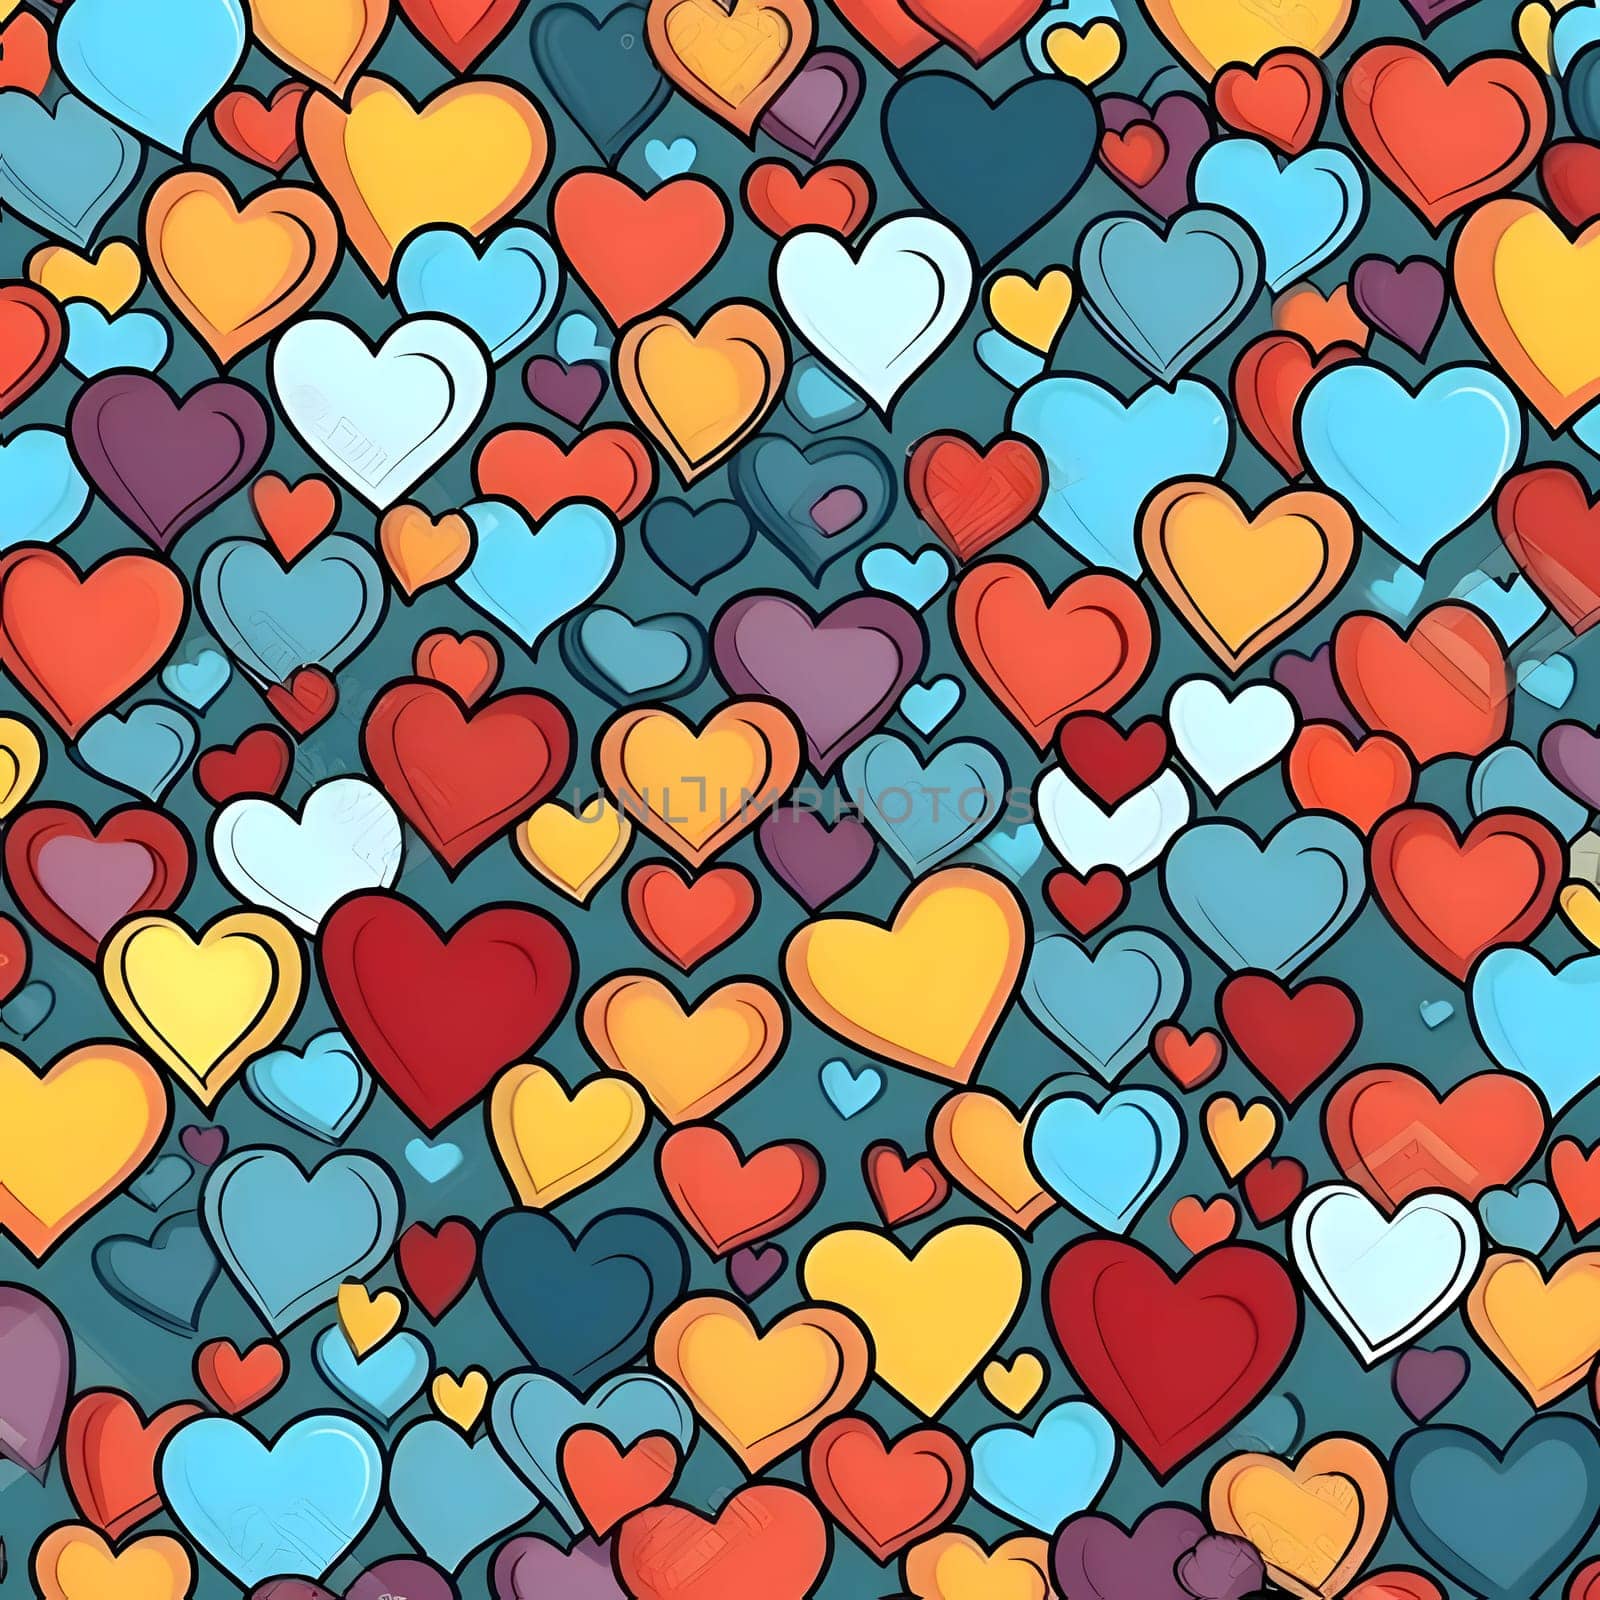 Patterns and banners backgrounds: Seamless pattern with colorful hearts on blue background. Vector illustration.